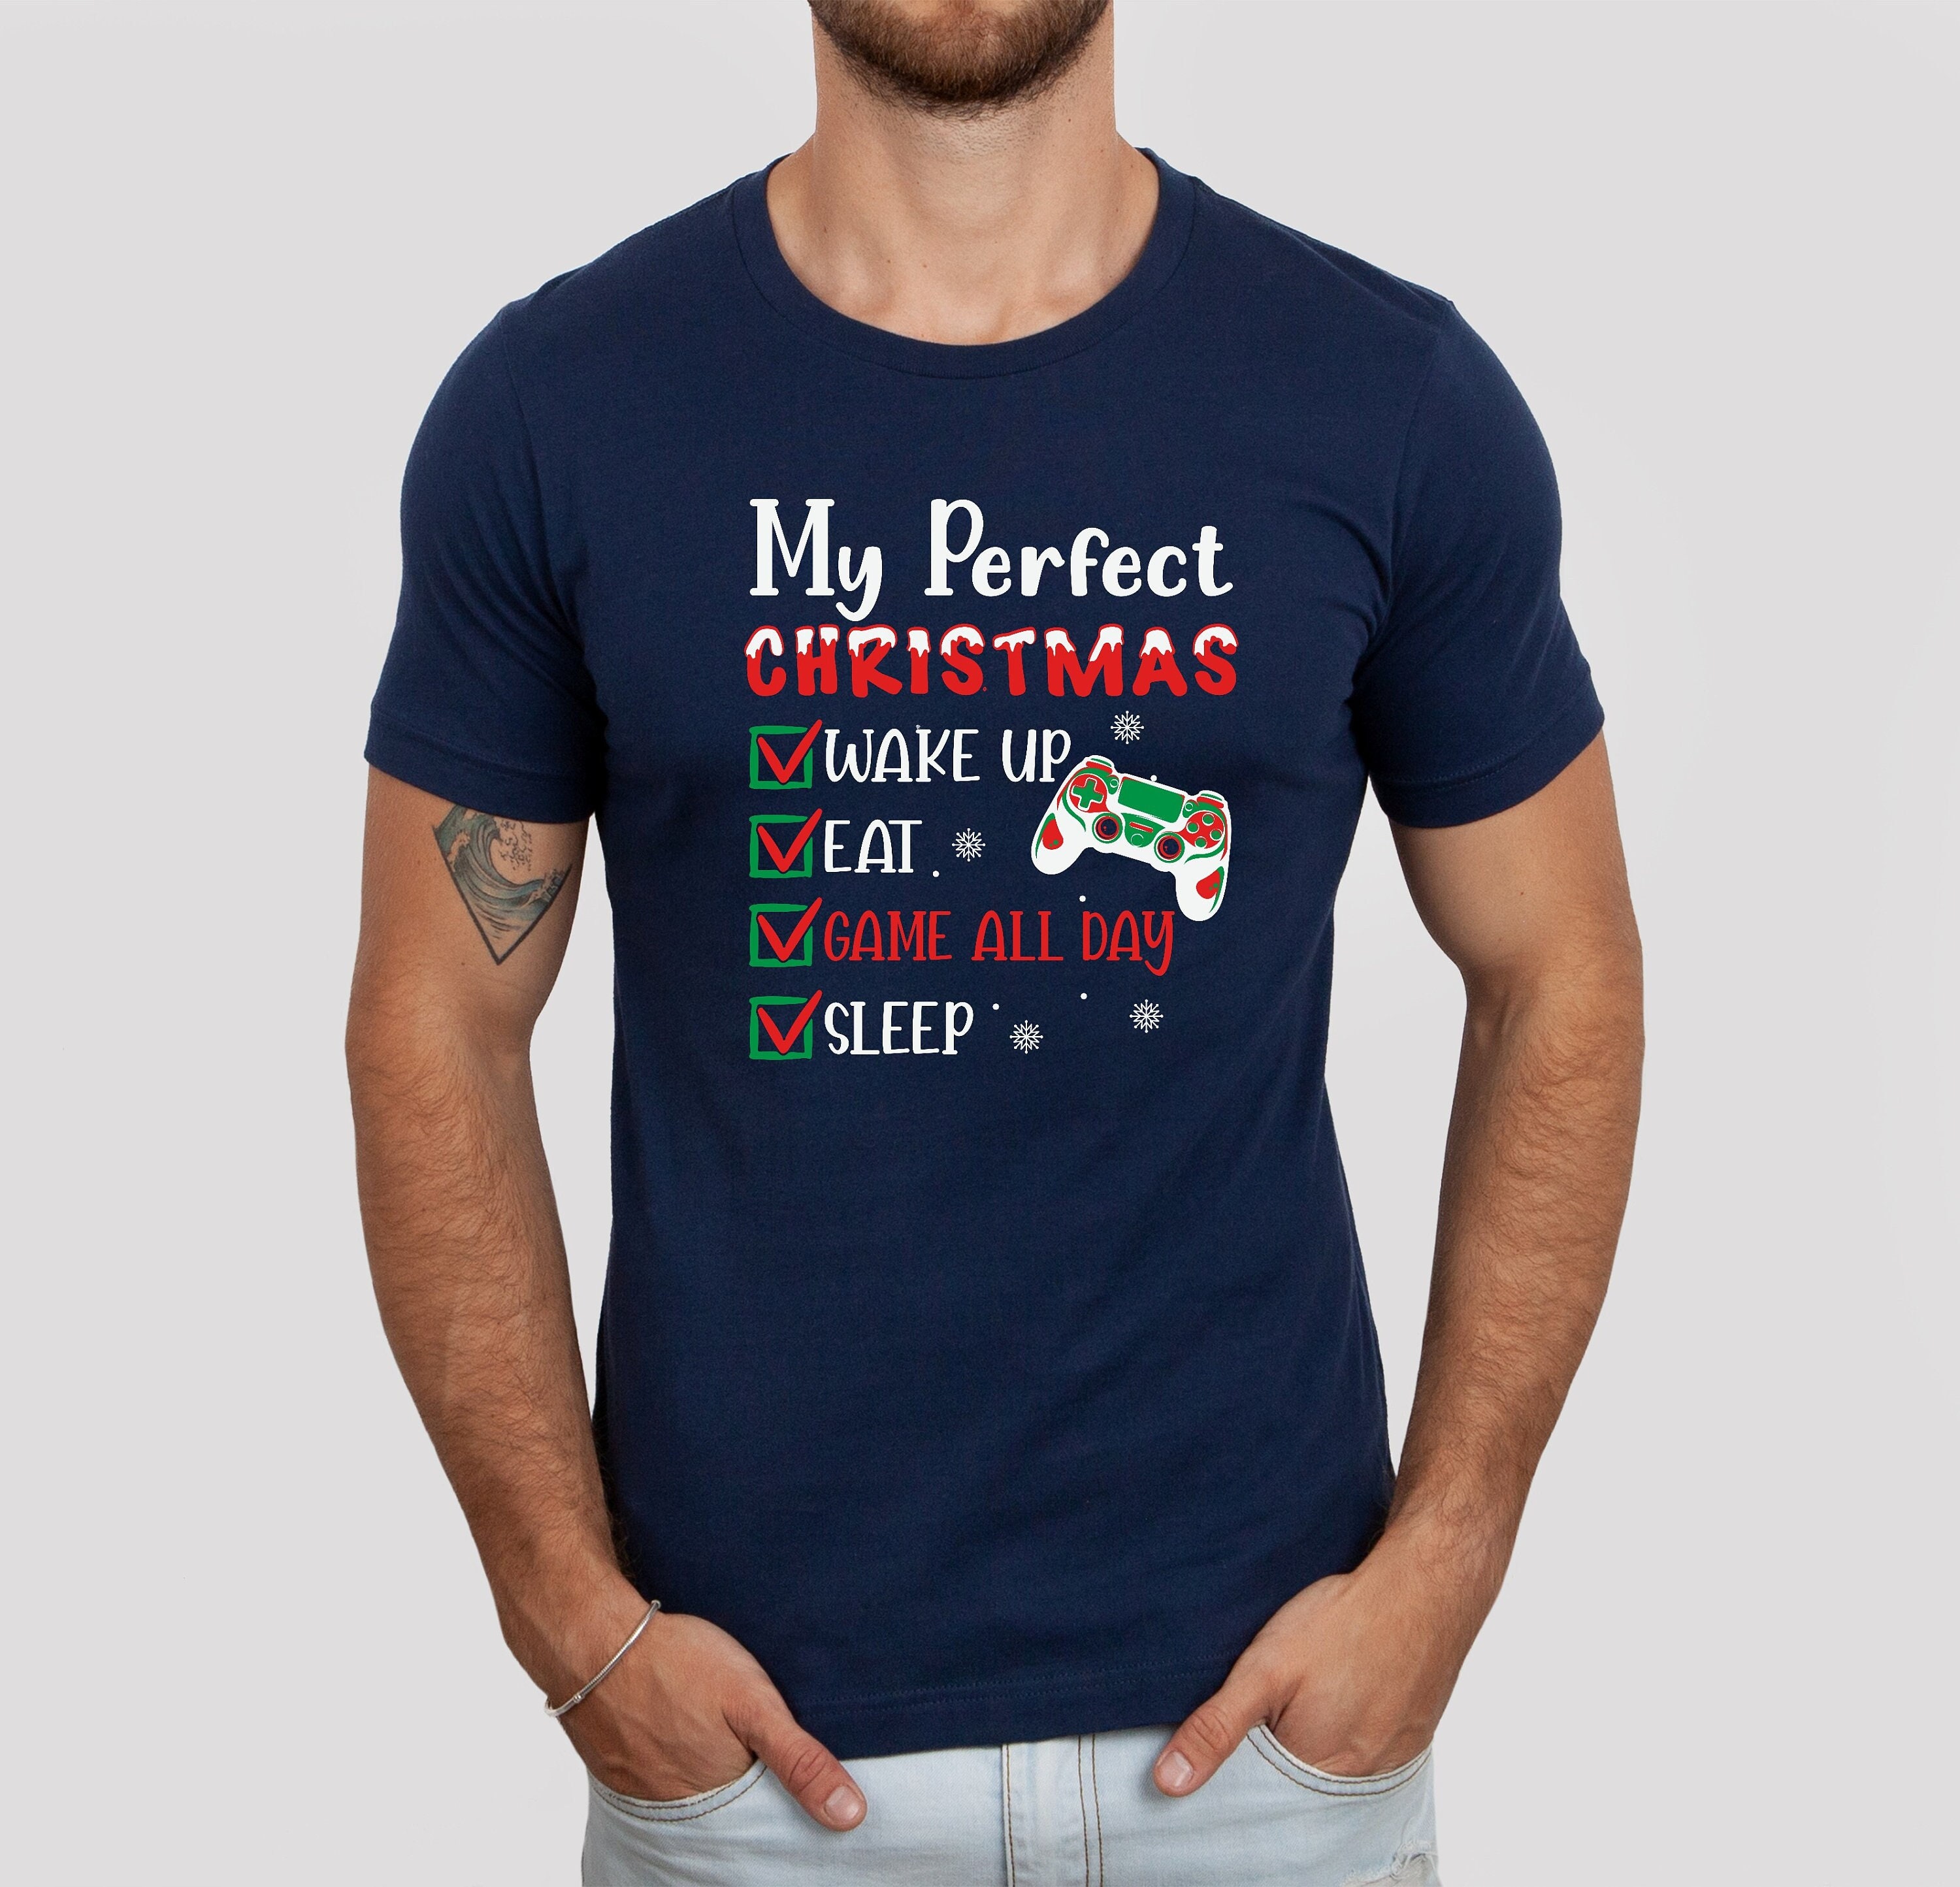 Game - Trending T-Shirts, Apparel & Gifts